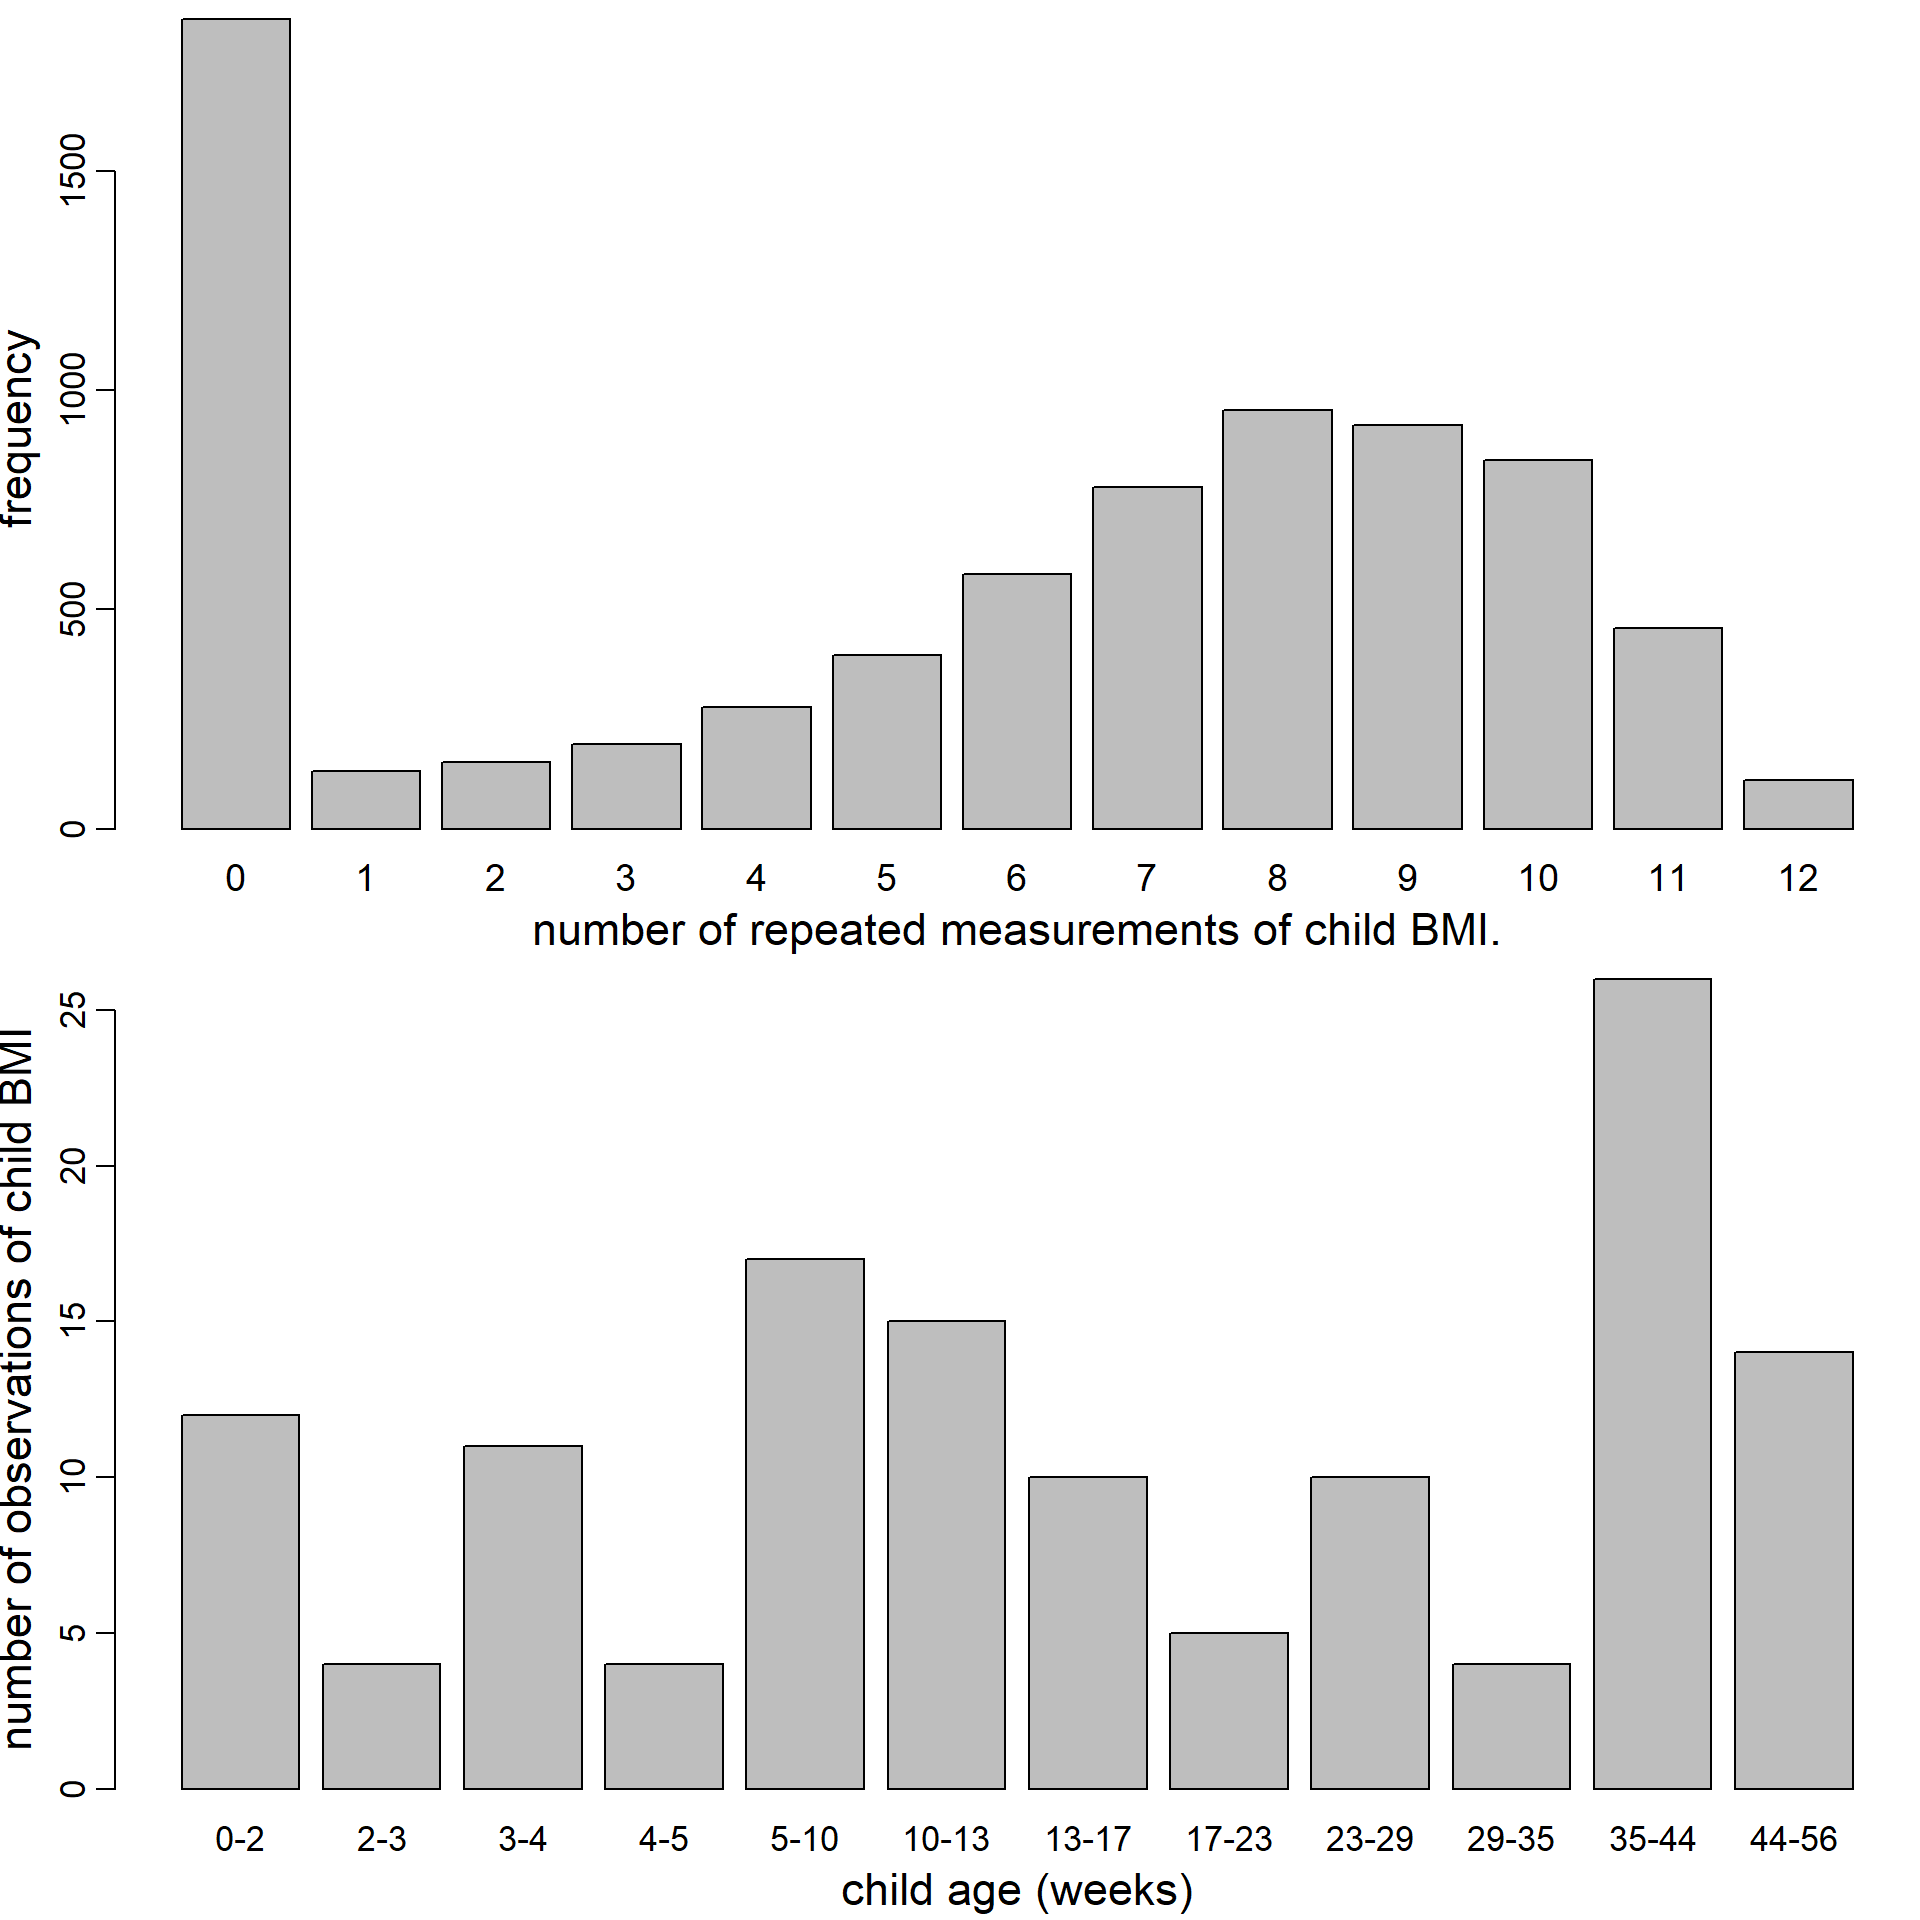 Distribution of the number of repeated BMI measurements per child (top) and number of
observed values of child BMI per age category (bottom).